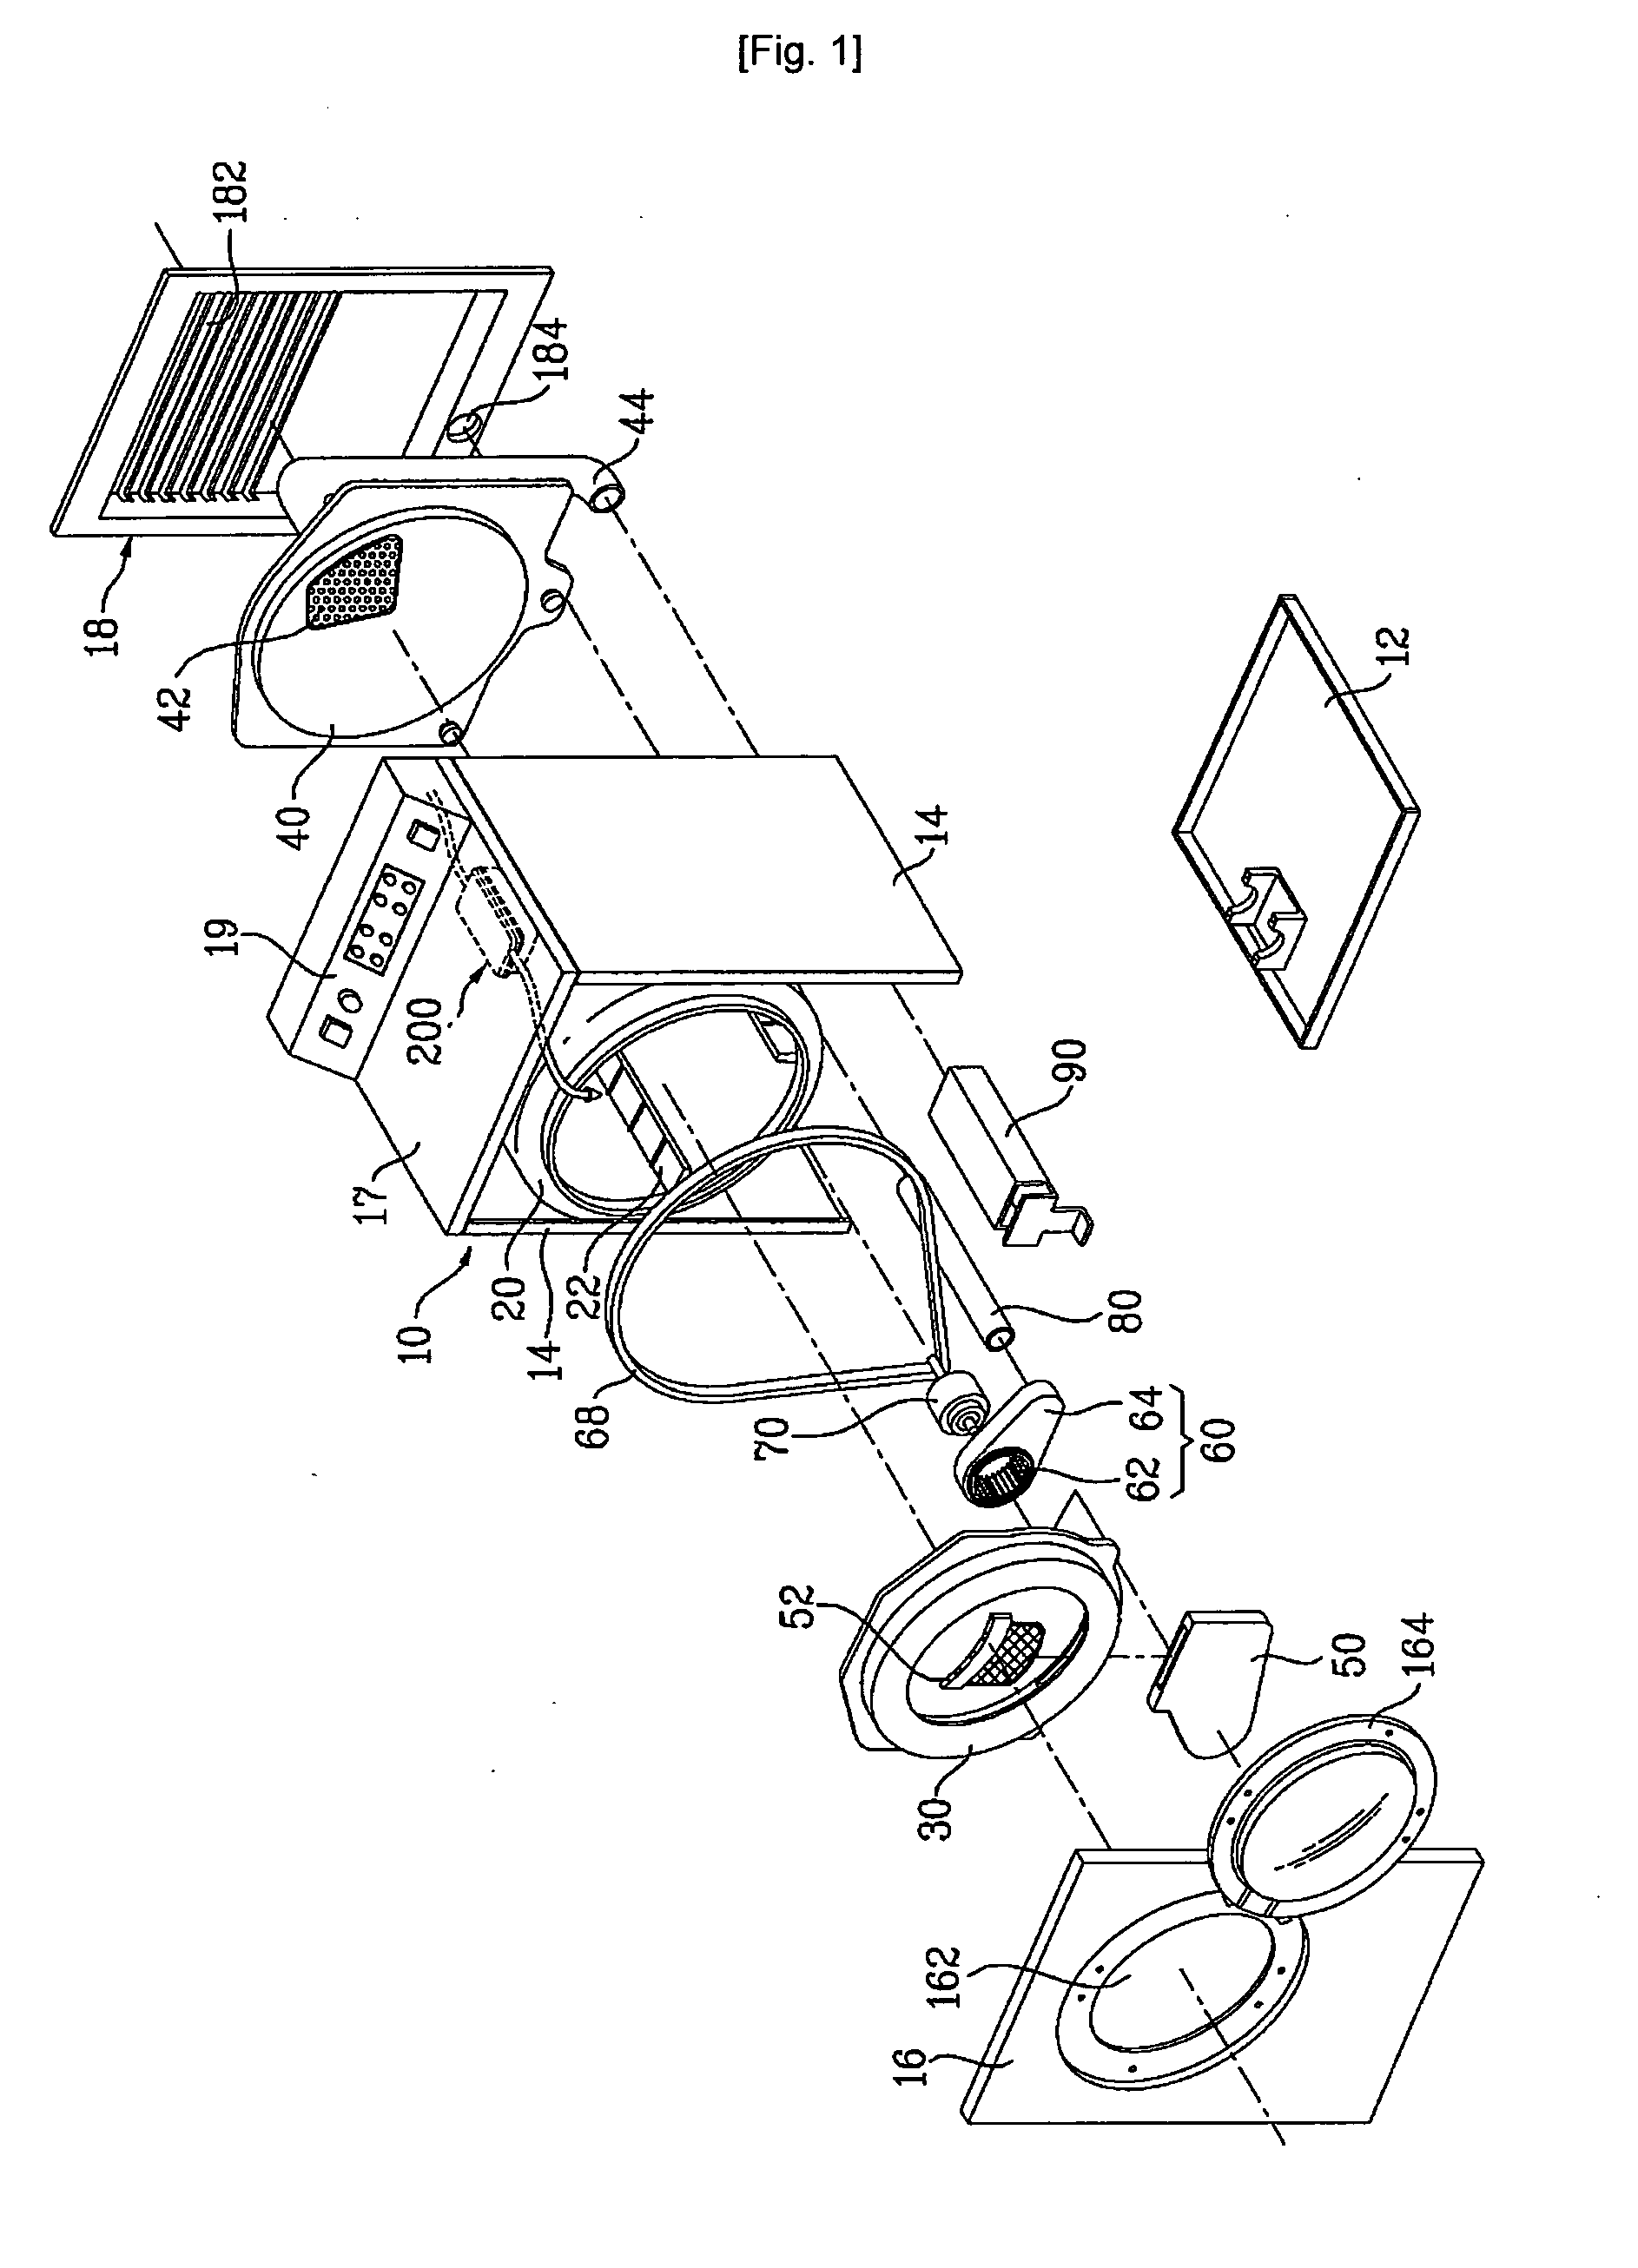 Laundry Dryer and Method for Controlling the Same